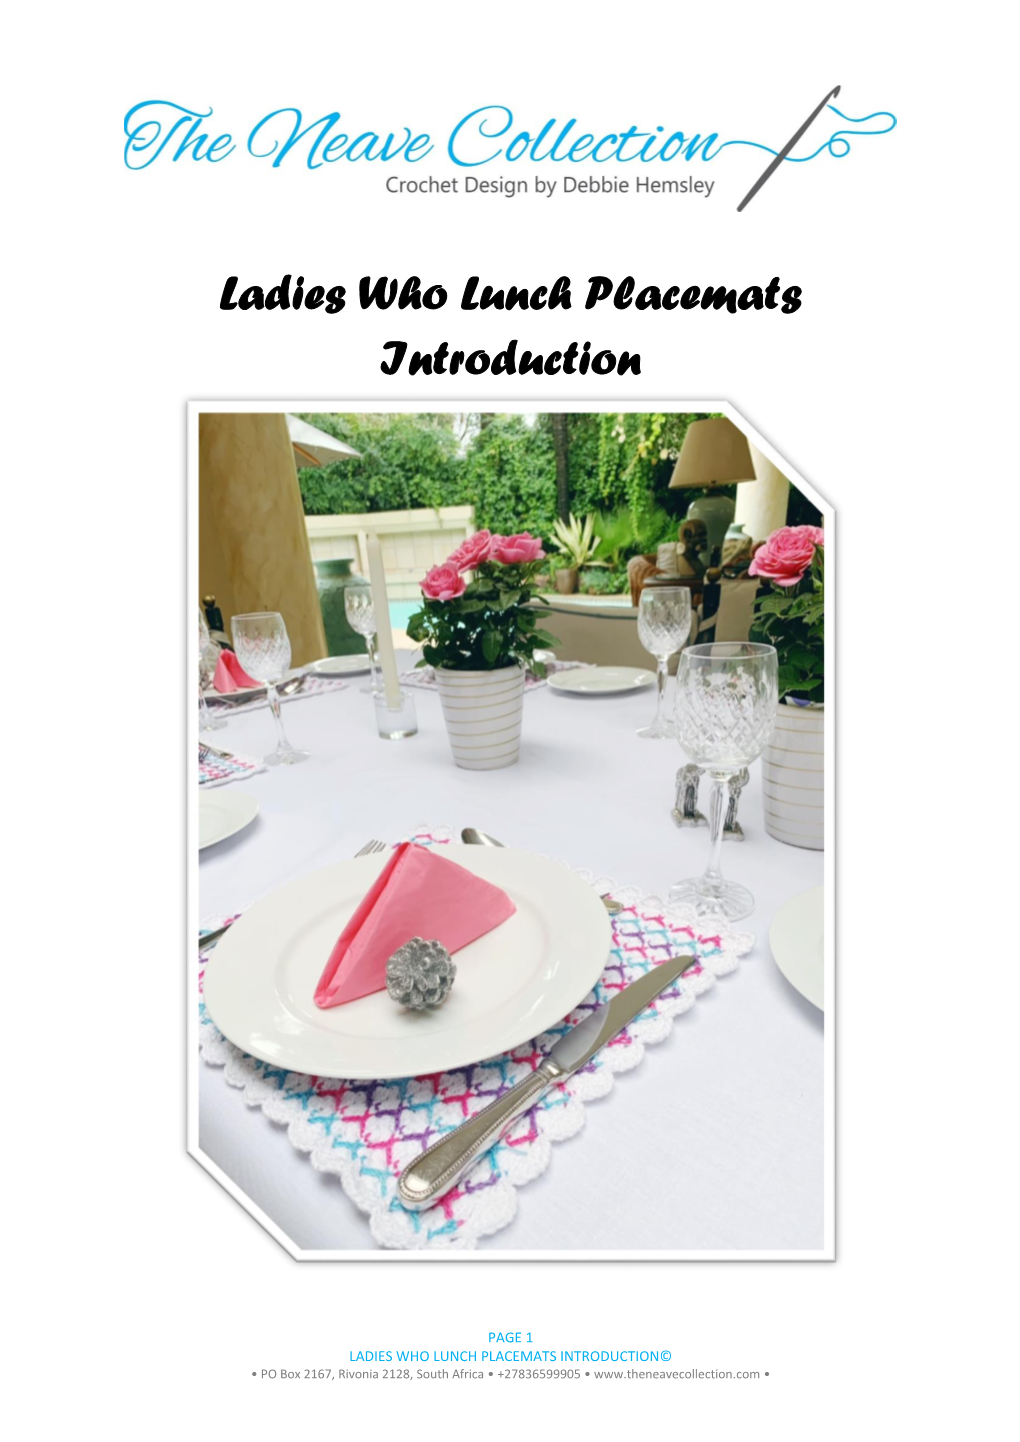 Ladies Who Lunch Placemats Introduction